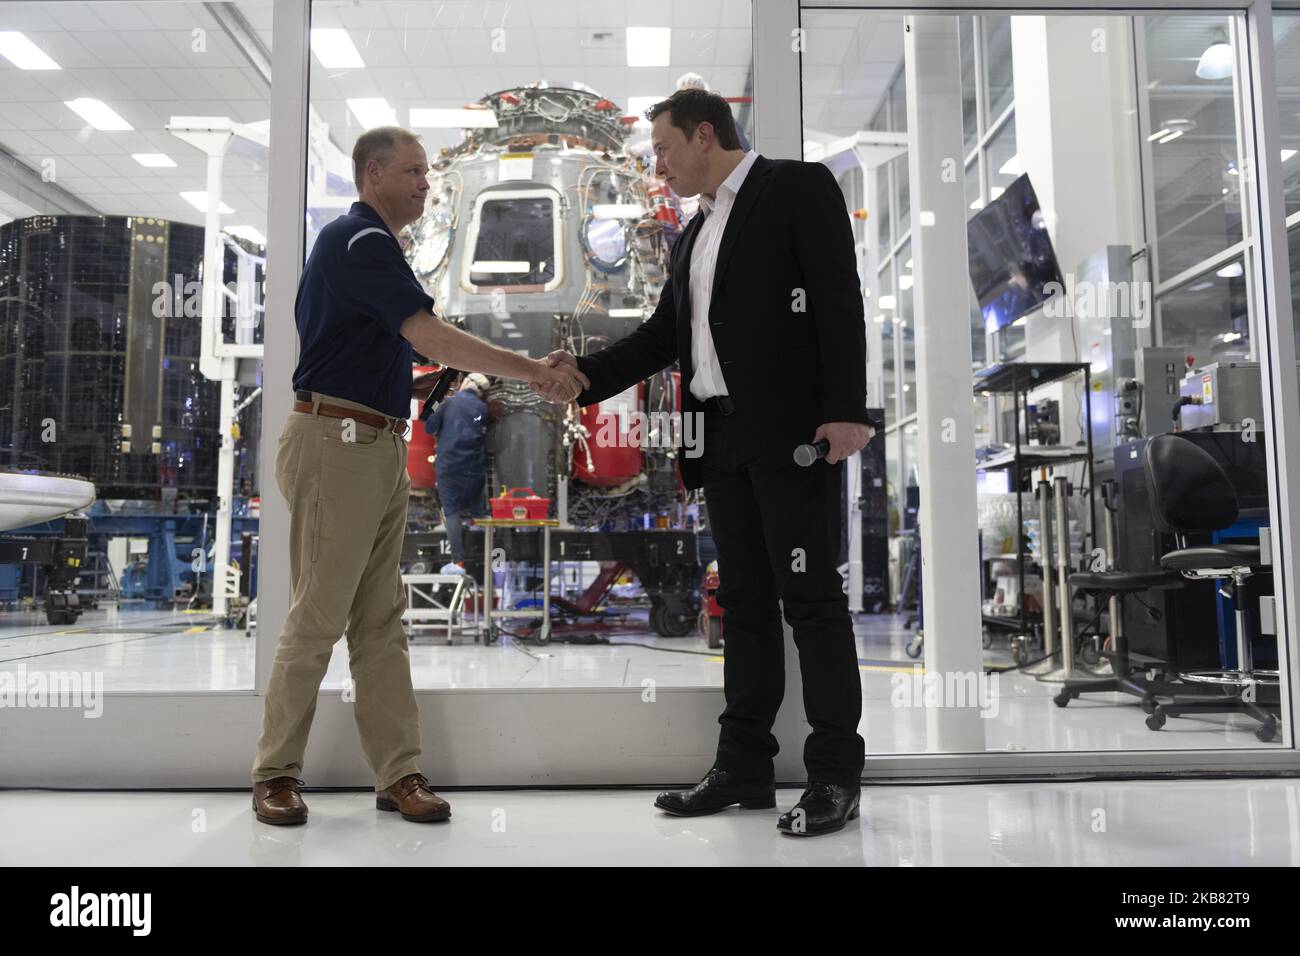 NASA administrator Jim Bridenstine and SpaceX Chief Engineer Elon Musk shake hands in front of Crew Dragon cleanroom at SpaceX Headquarters in Hawthorne, California on October 10, 2019. (Photo by Yichuan Cao/NurPhoto) Stock Photo